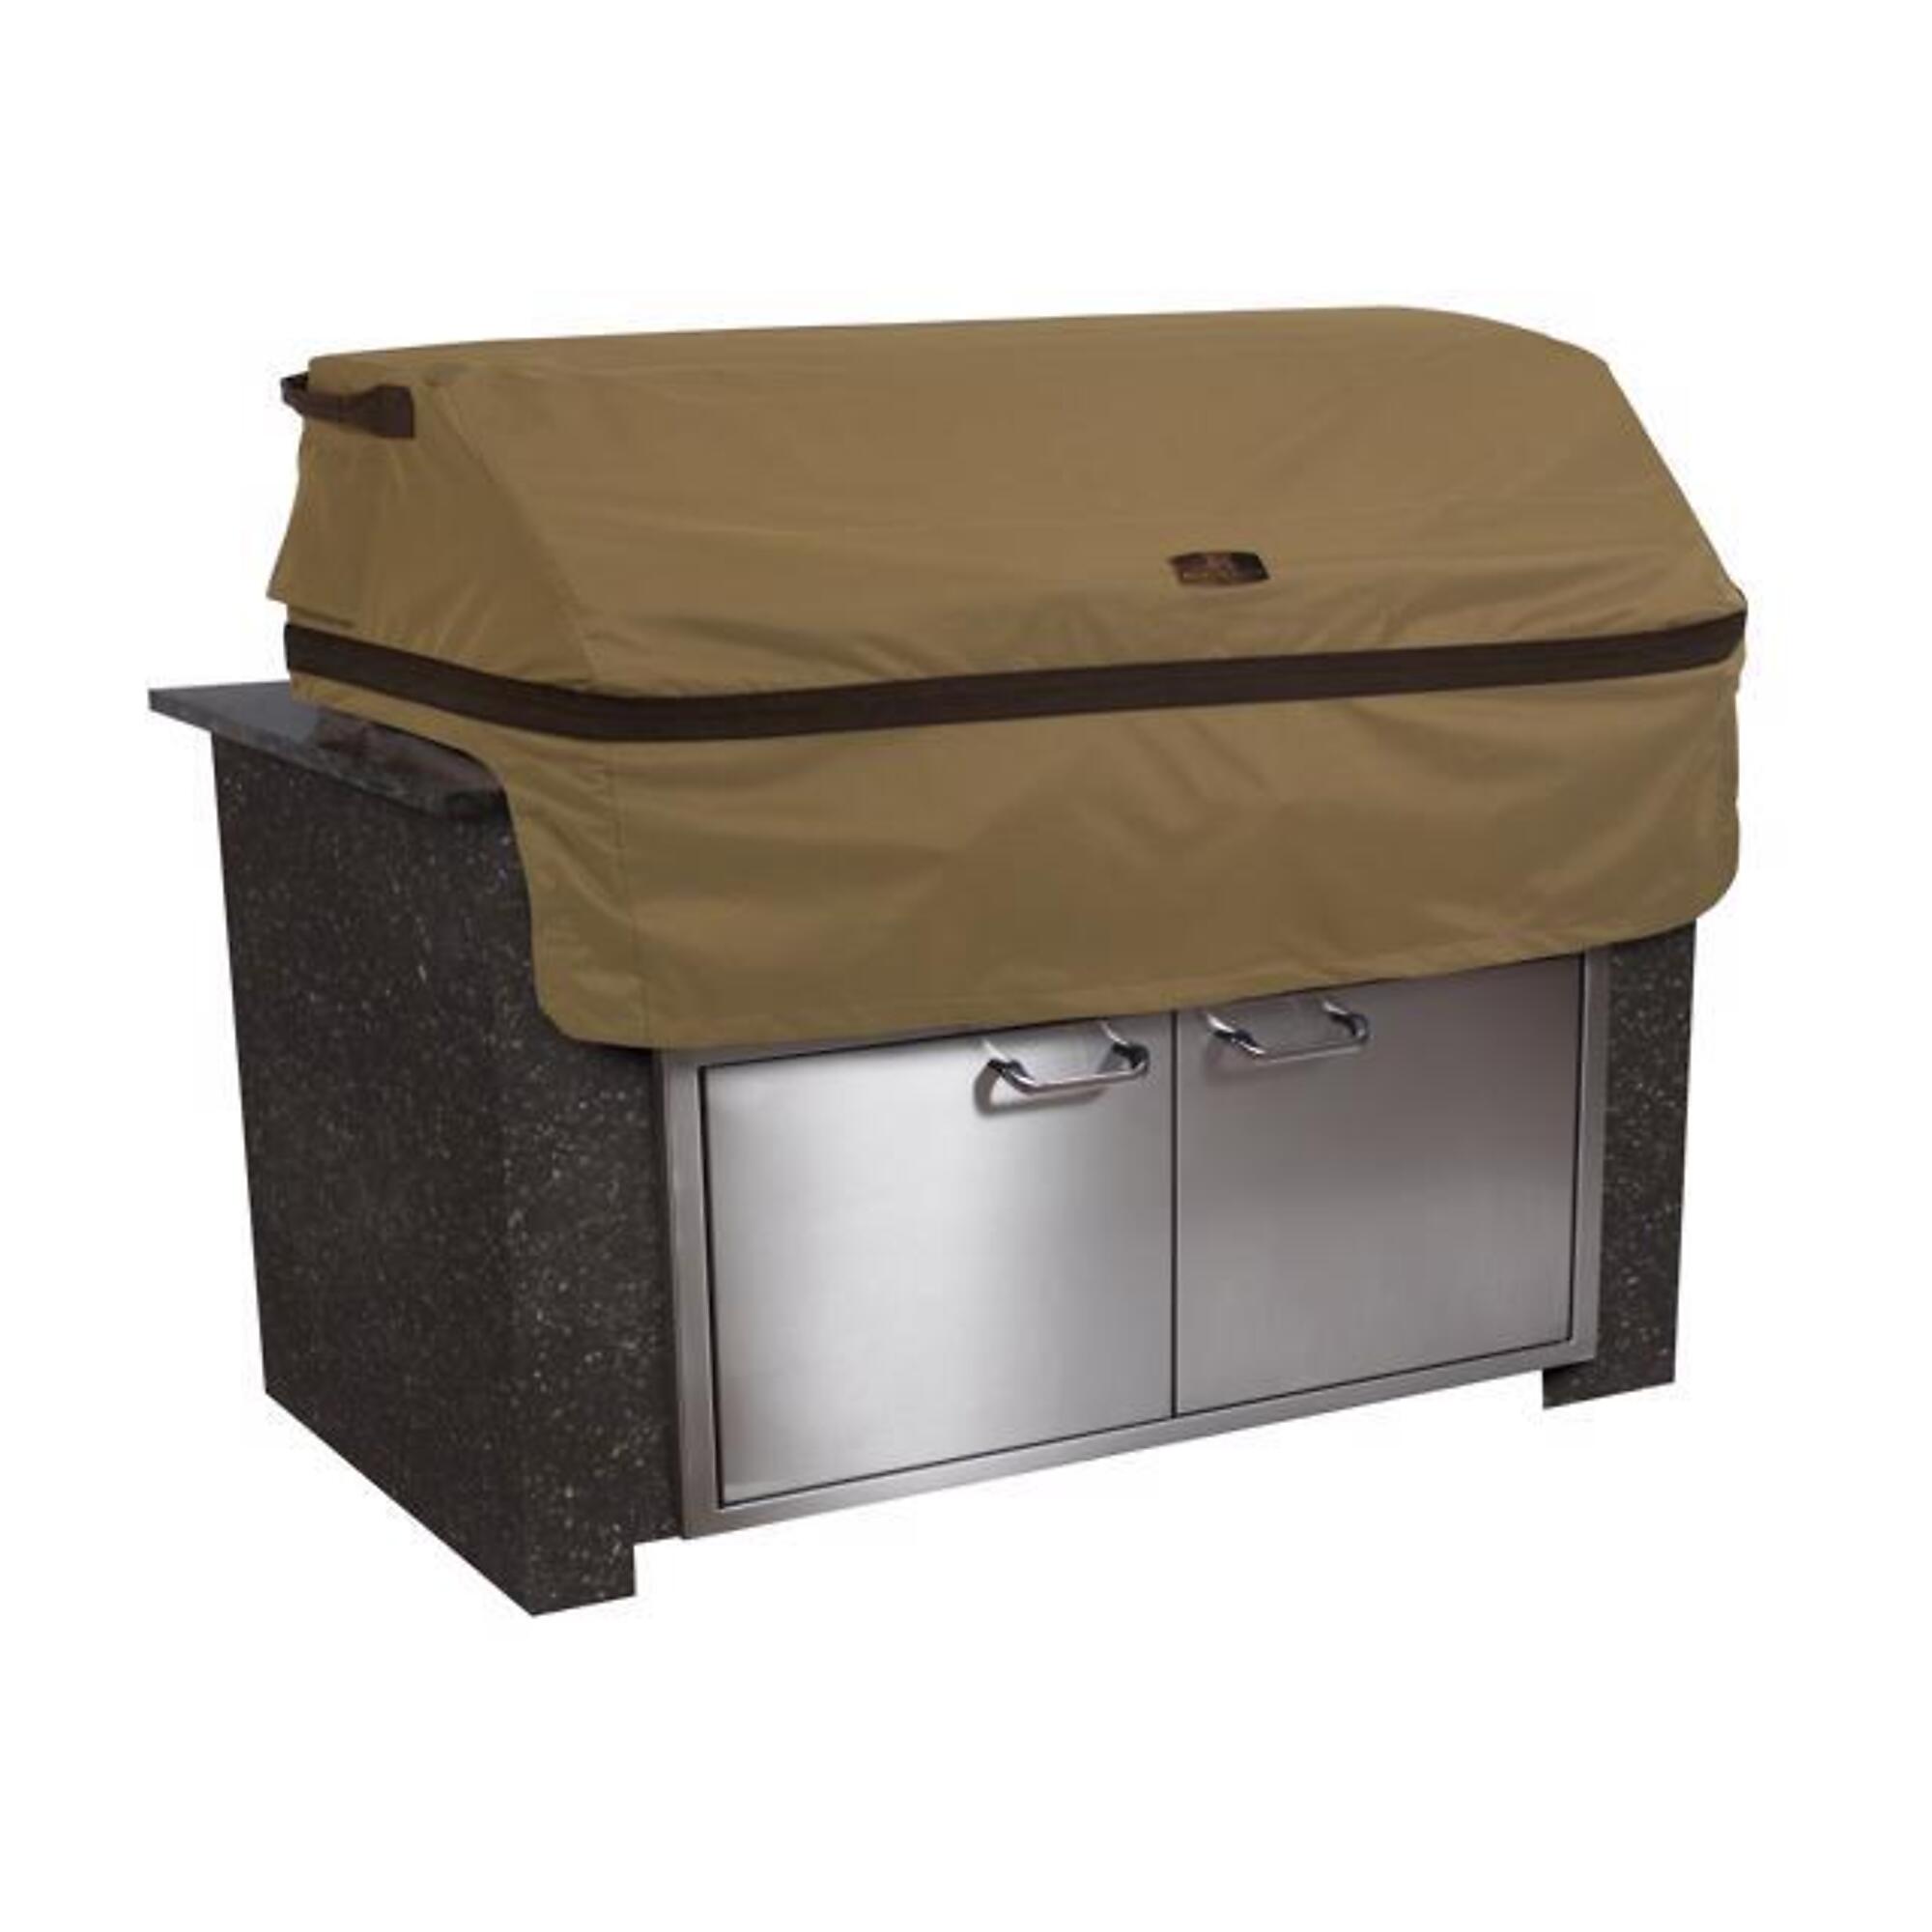 Classic Accessories Hickory Built-In BBQ Grill Top Cover, XS, Beige, Polyester, Model 55-330-362401-EC